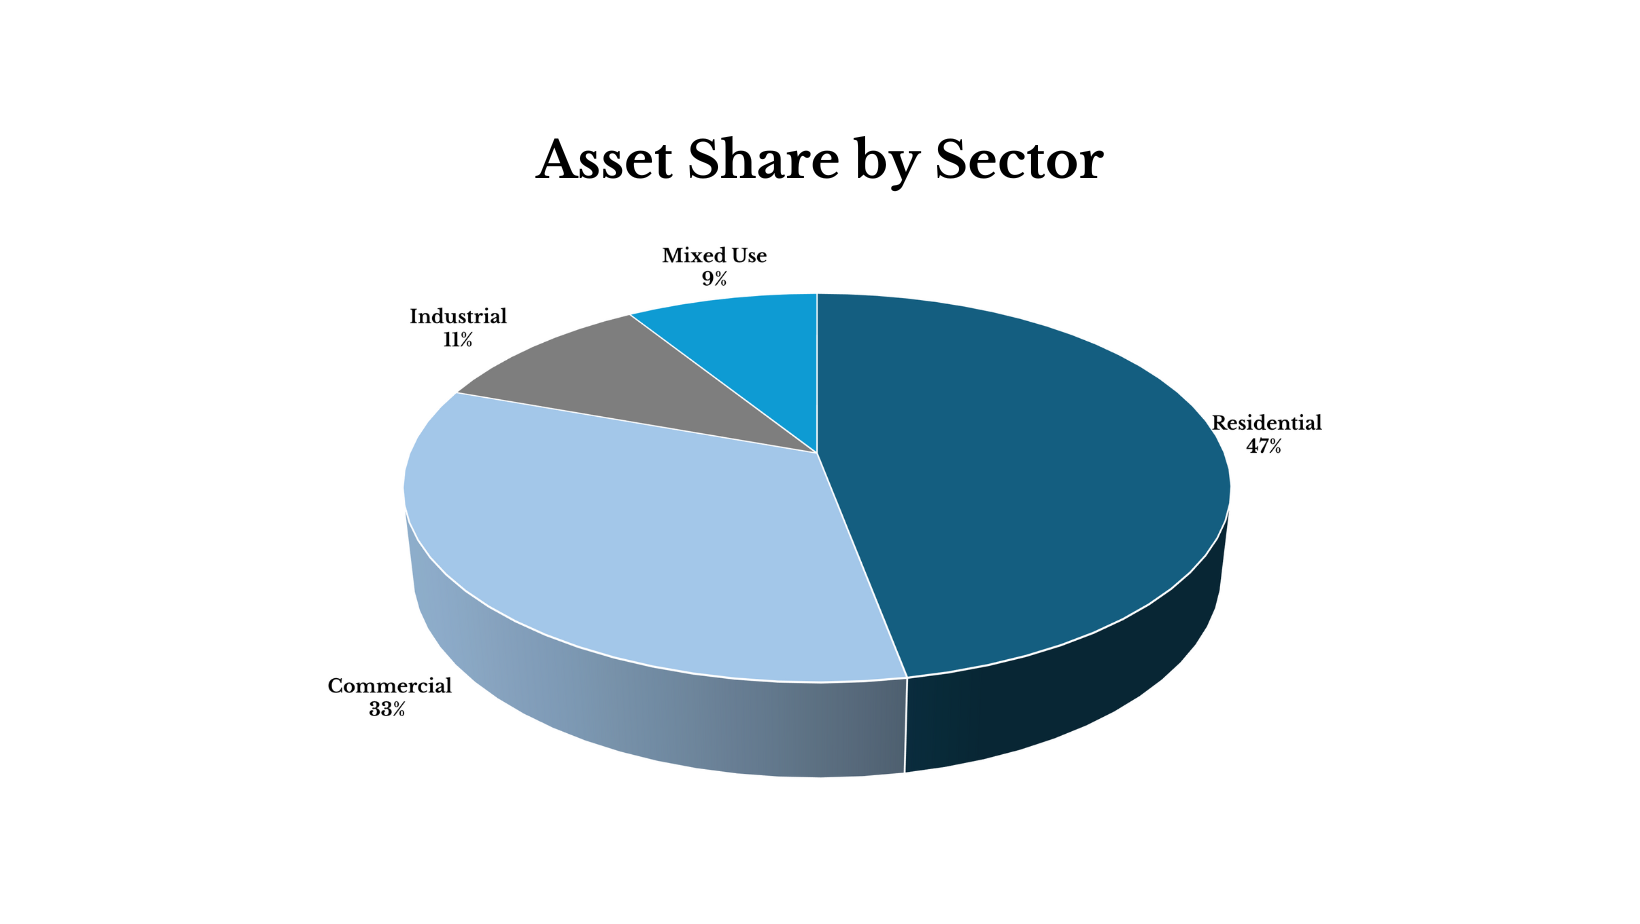 Capital Prudential Asset Share by Sector